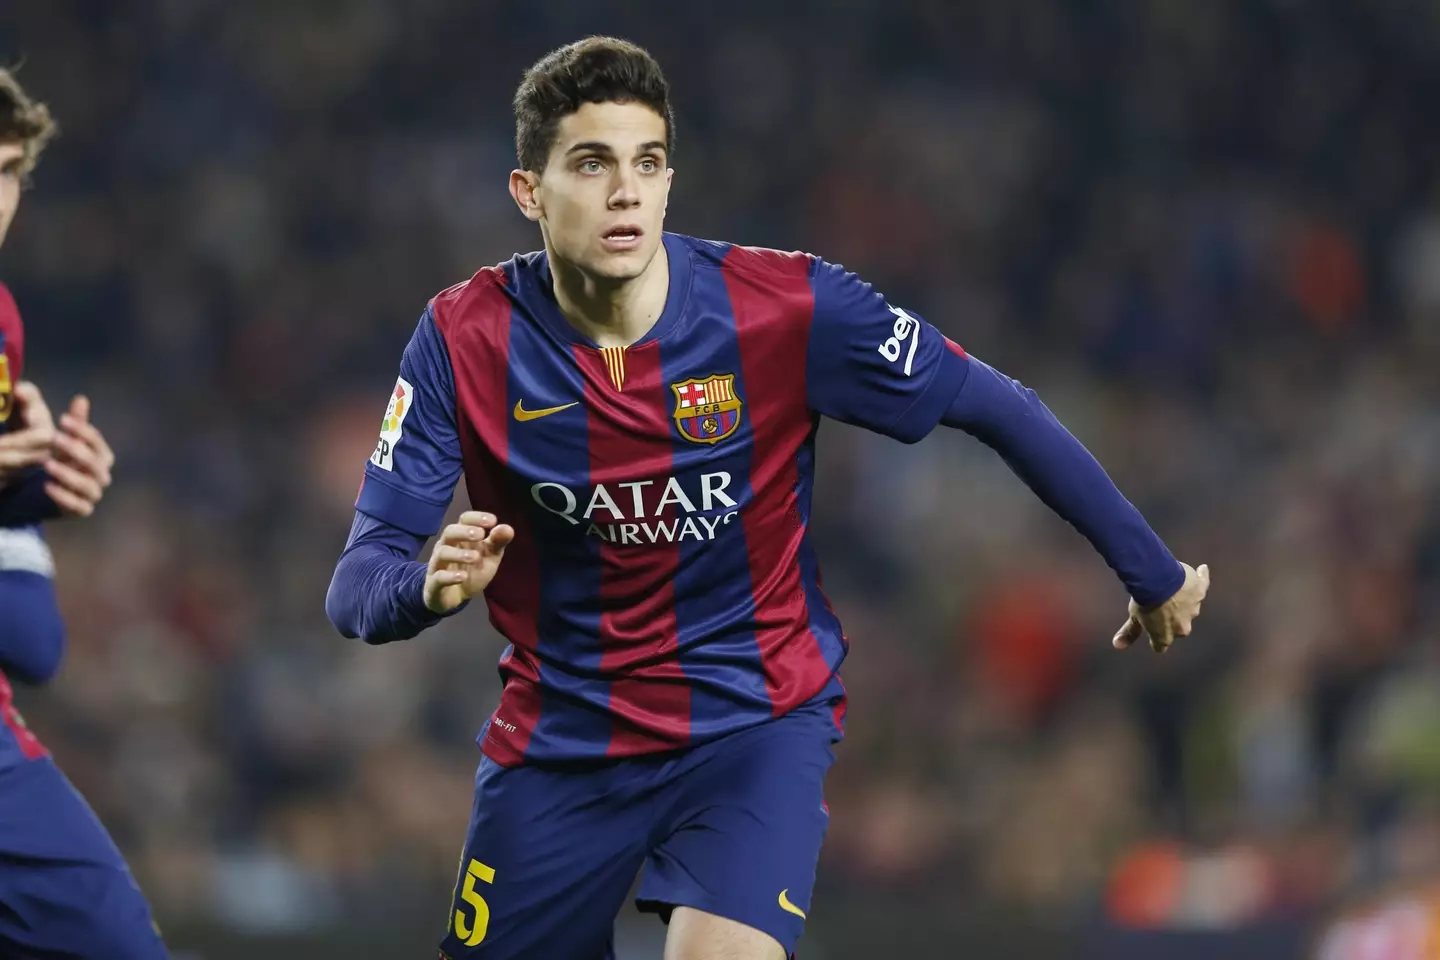 Bartra has played over 100 games for Barcelona. Image: PA Images